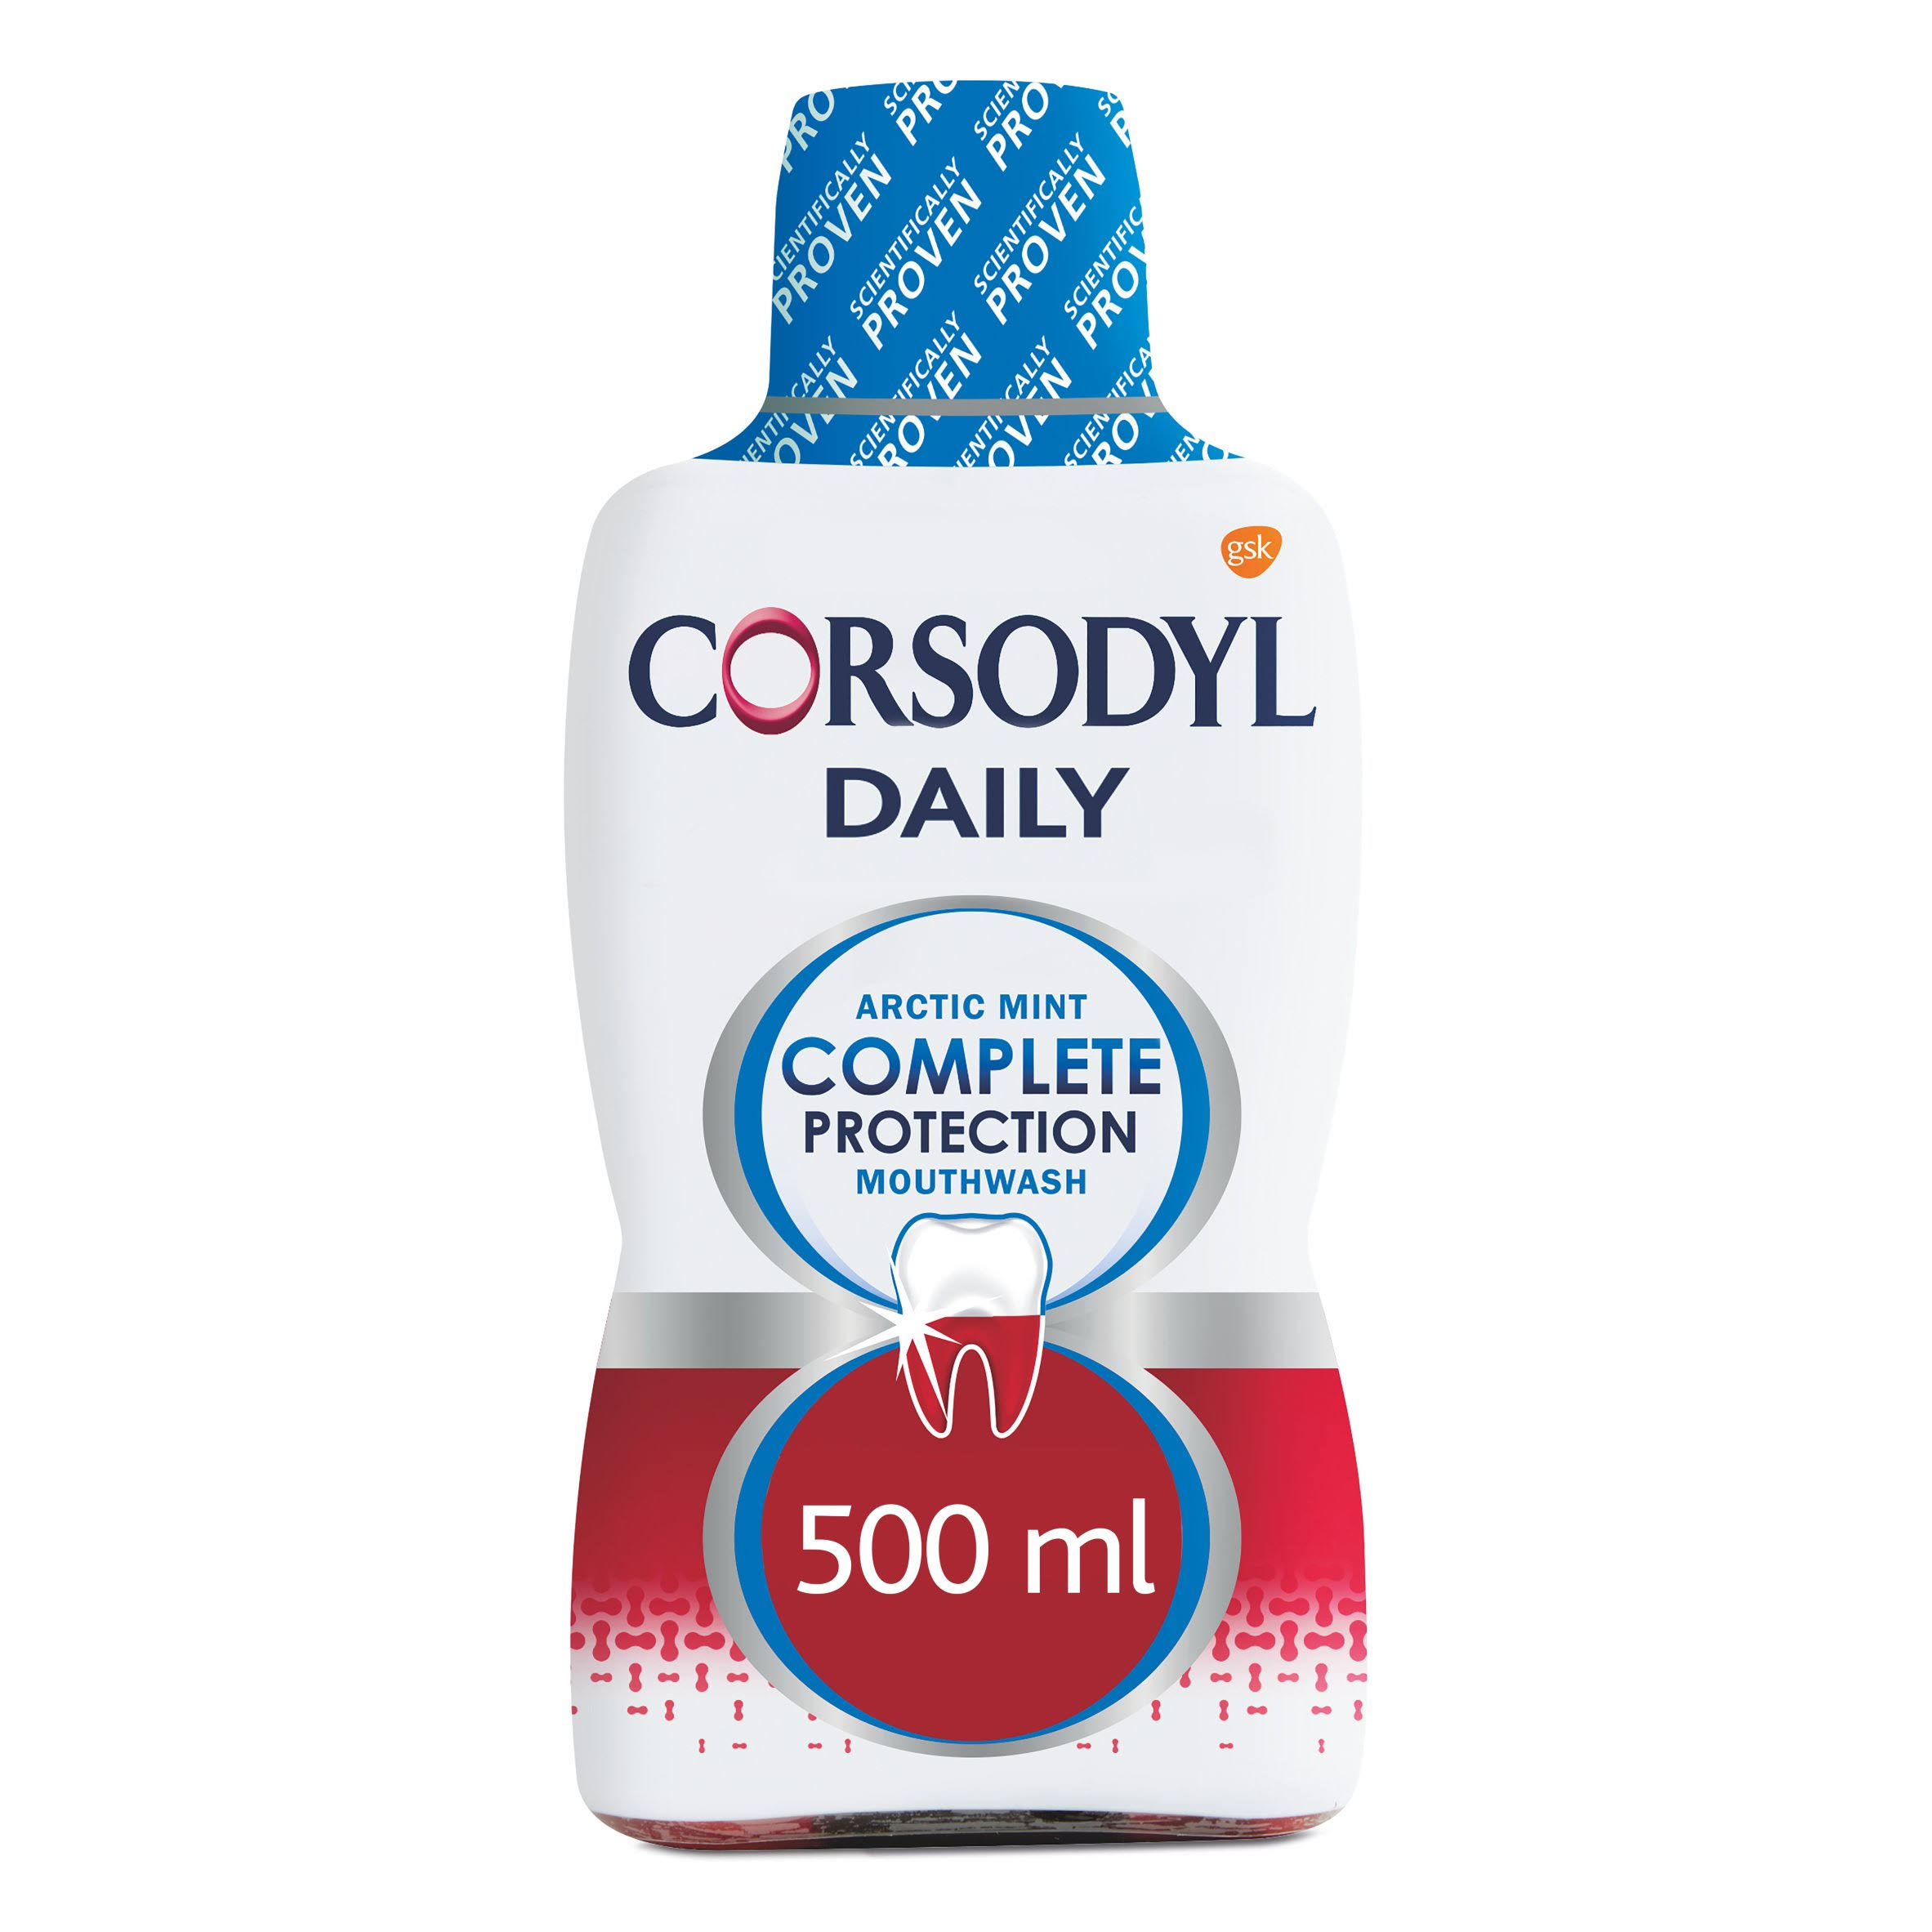 Corsodyl Daily Arctic Mint Complete Protection Mouthwash 500ml